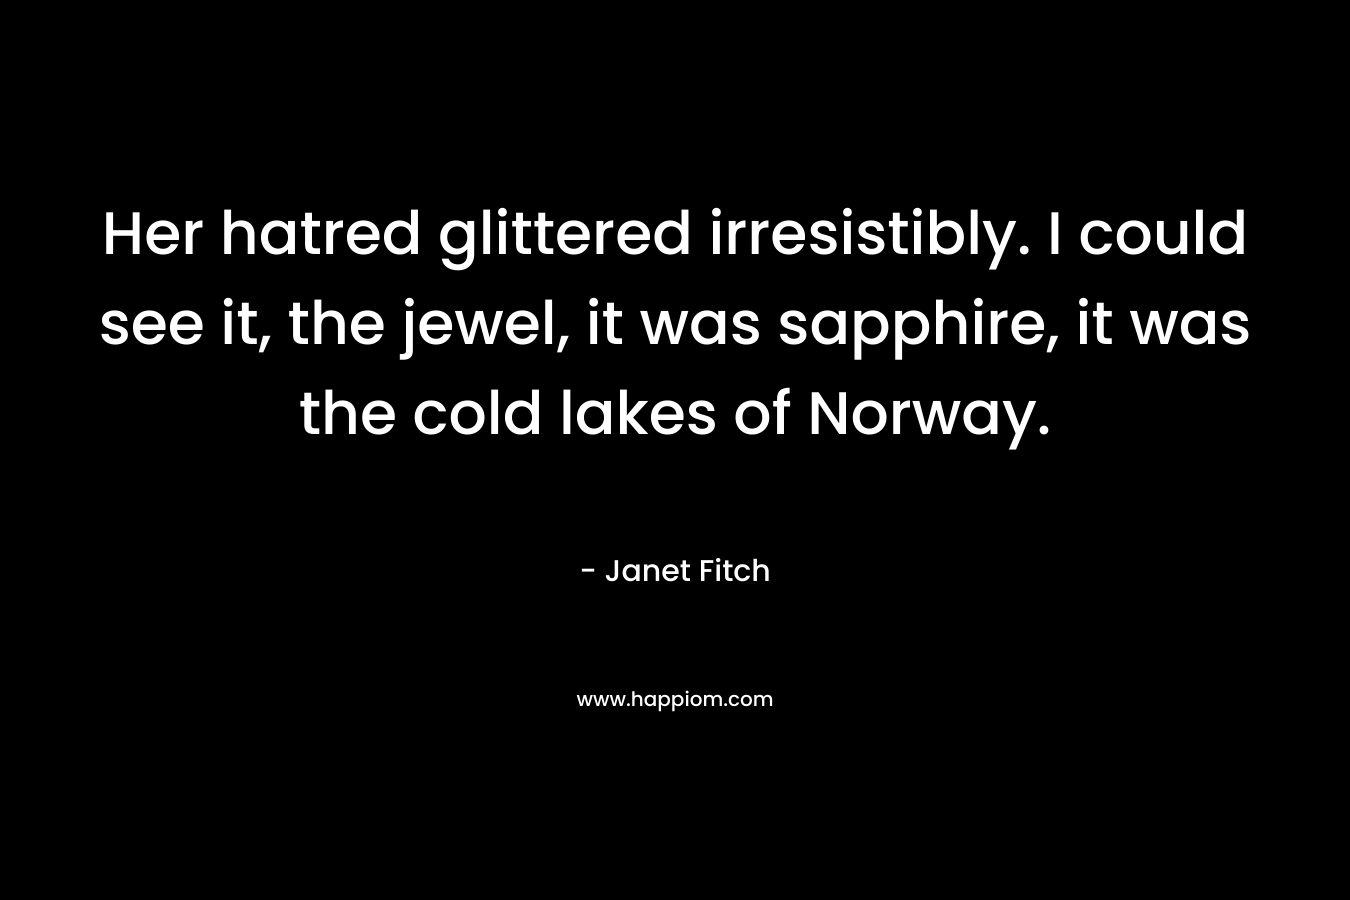 Her hatred glittered irresistibly. I could see it, the jewel, it was sapphire, it was the cold lakes of Norway. – Janet Fitch